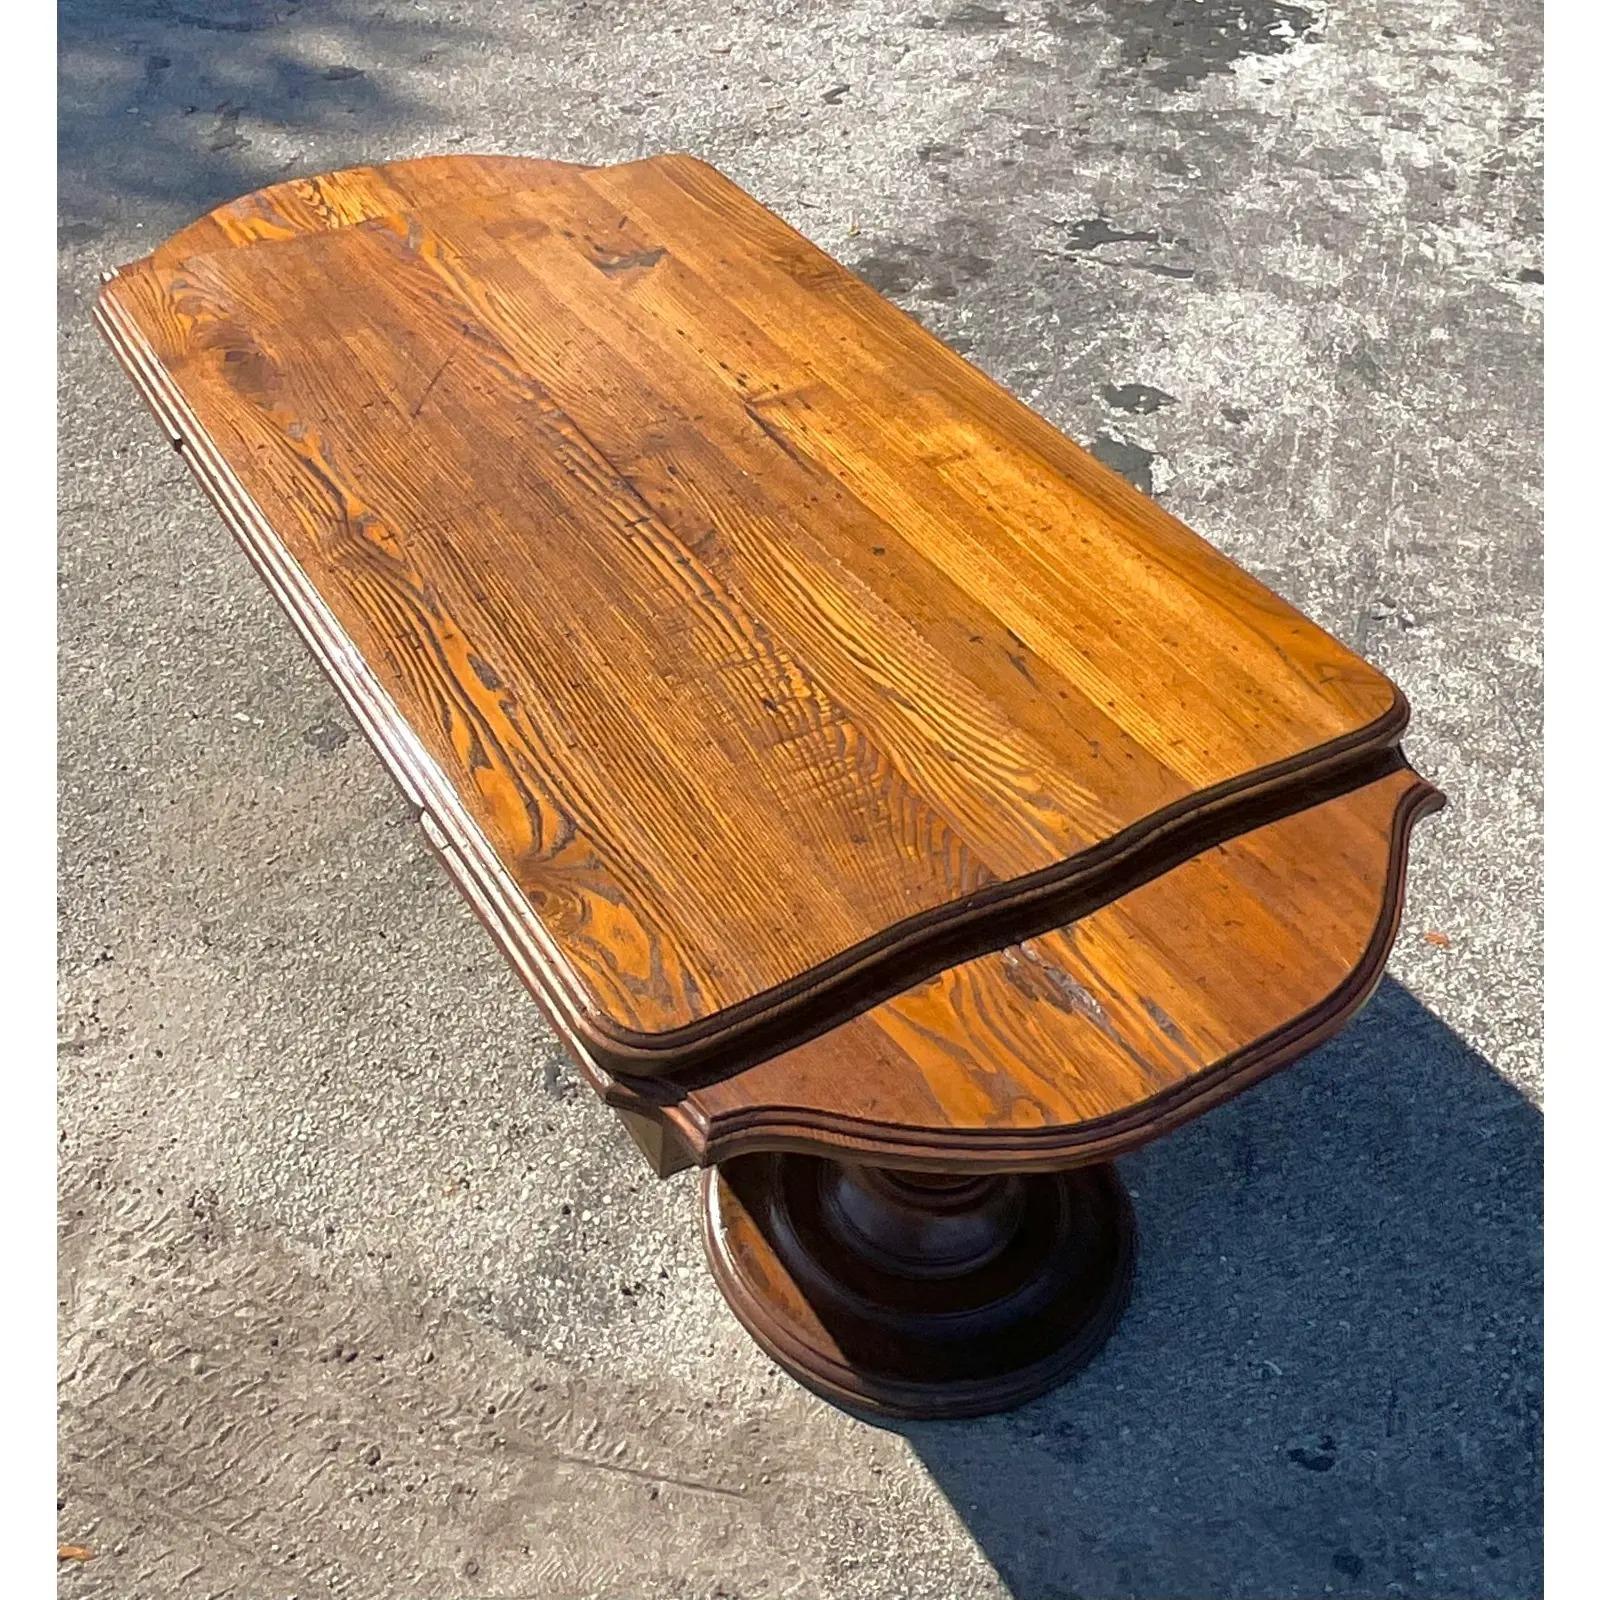 A fabulous vintage Boho pine coffee table. A chic little table with fully extendable ends for extra surface space. Great for entertaining. Owned by the Iconic Lily Pulitzer and acquired directly from her family. A real slice of American